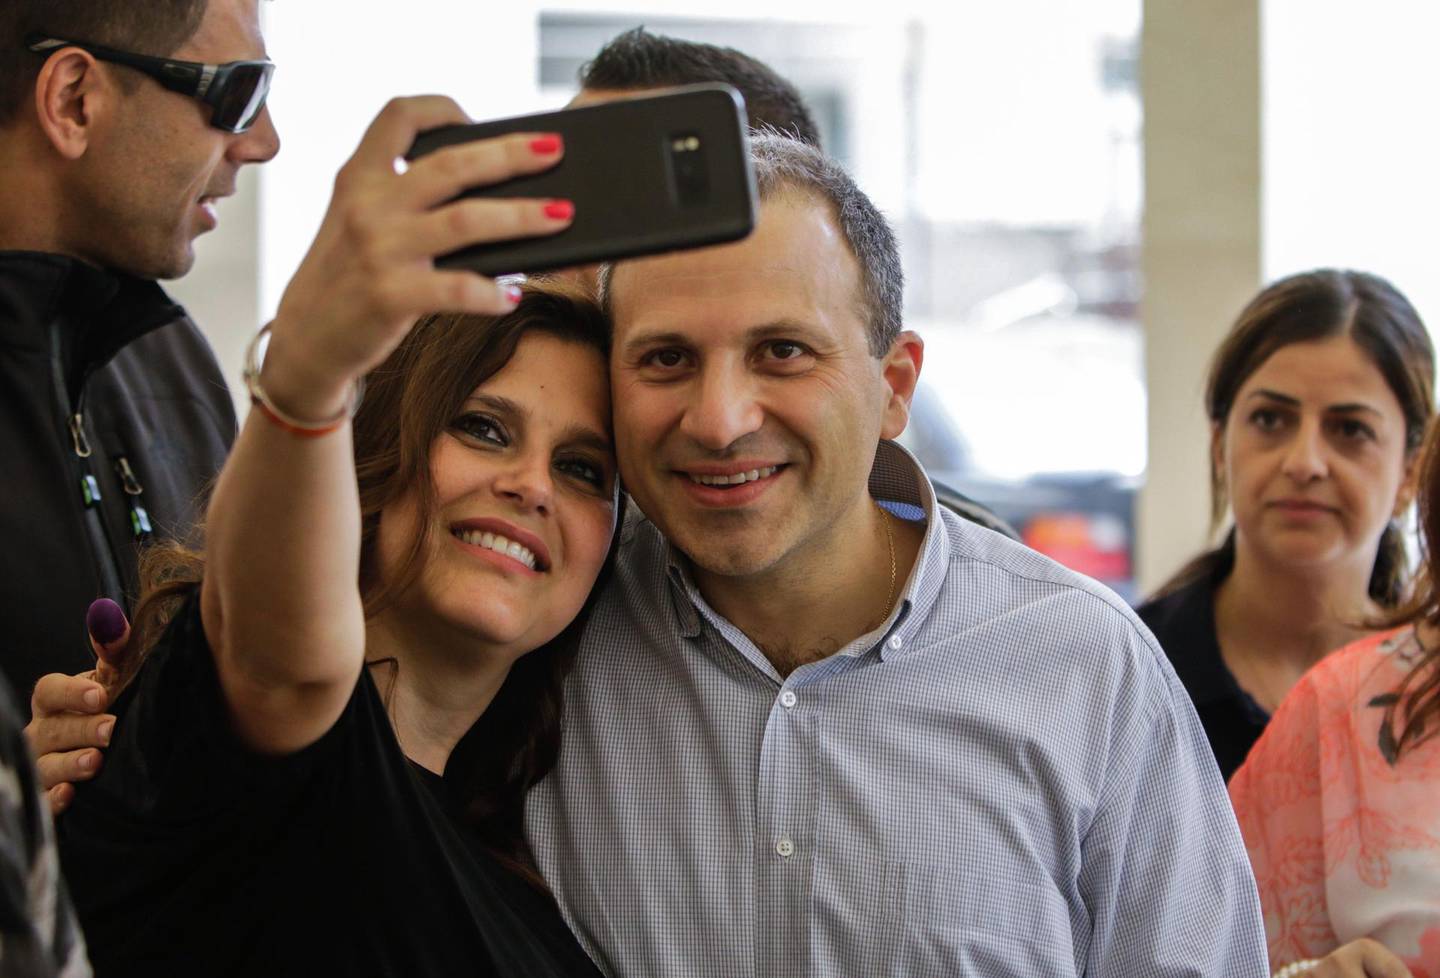 Gibran Bassil (C), the Lebanese Foreign Minister and leader of the "Free Patriotic Movement", poses for a "selfie" photograph with his wife Chantal as he arrives to cast his vote at a polling station in the Lebanese coastal city of Batroun, north of the capital Beirut, on May 6, 2018, as the country votes in the first parliamentary election in nine years.
Polling stations opened at 7:00 am across the small country, which has an electorate of around 3.7 million, and were due to close 12 hours later, with results from all 15 districts expected the following day. / AFP PHOTO / IBRAHIM CHALHOUB